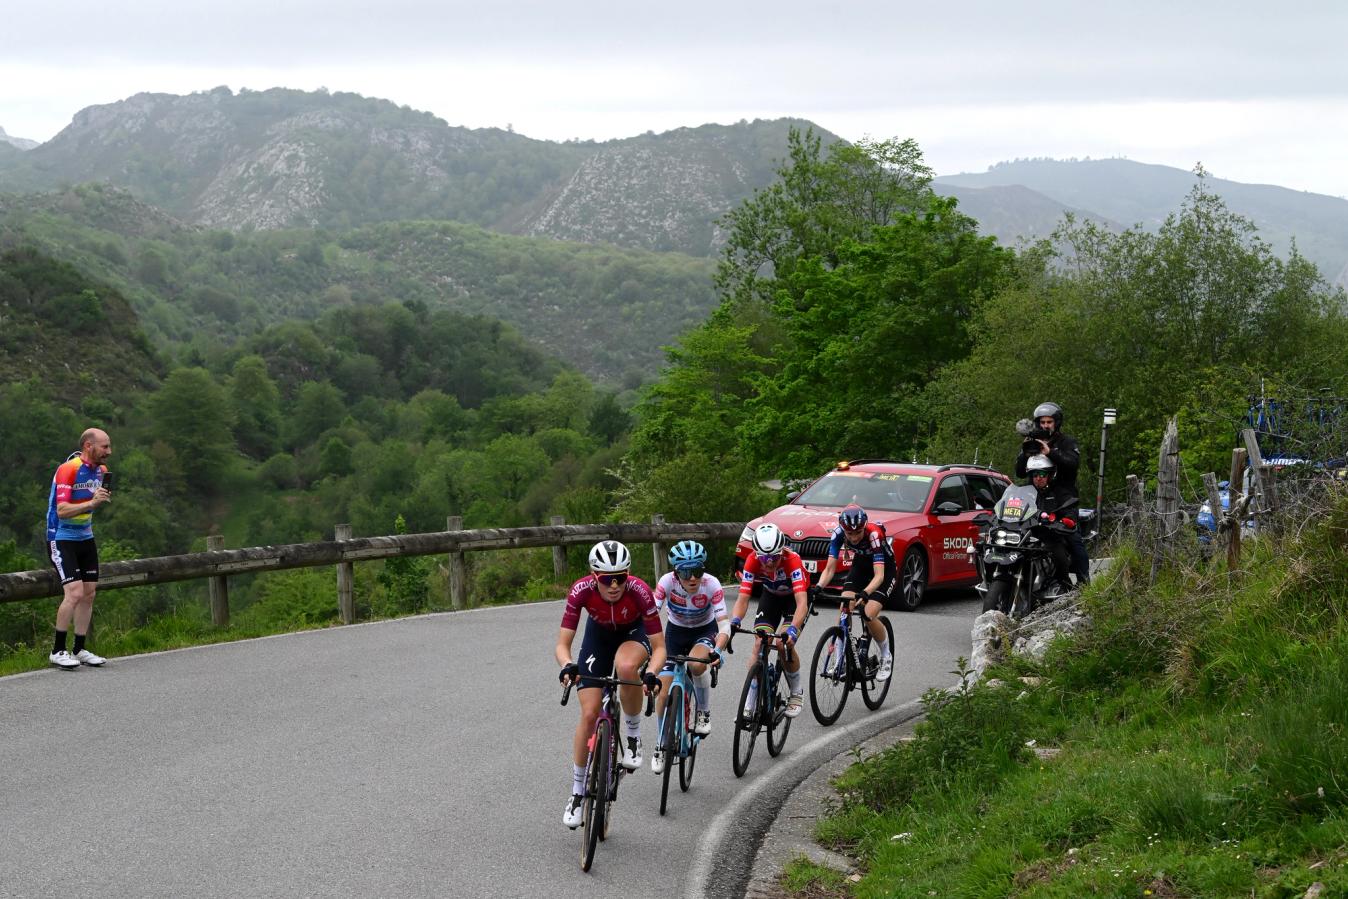 The high mountains pitted the world's best climbers against one another to decide the inaugural Vuelta Femenina